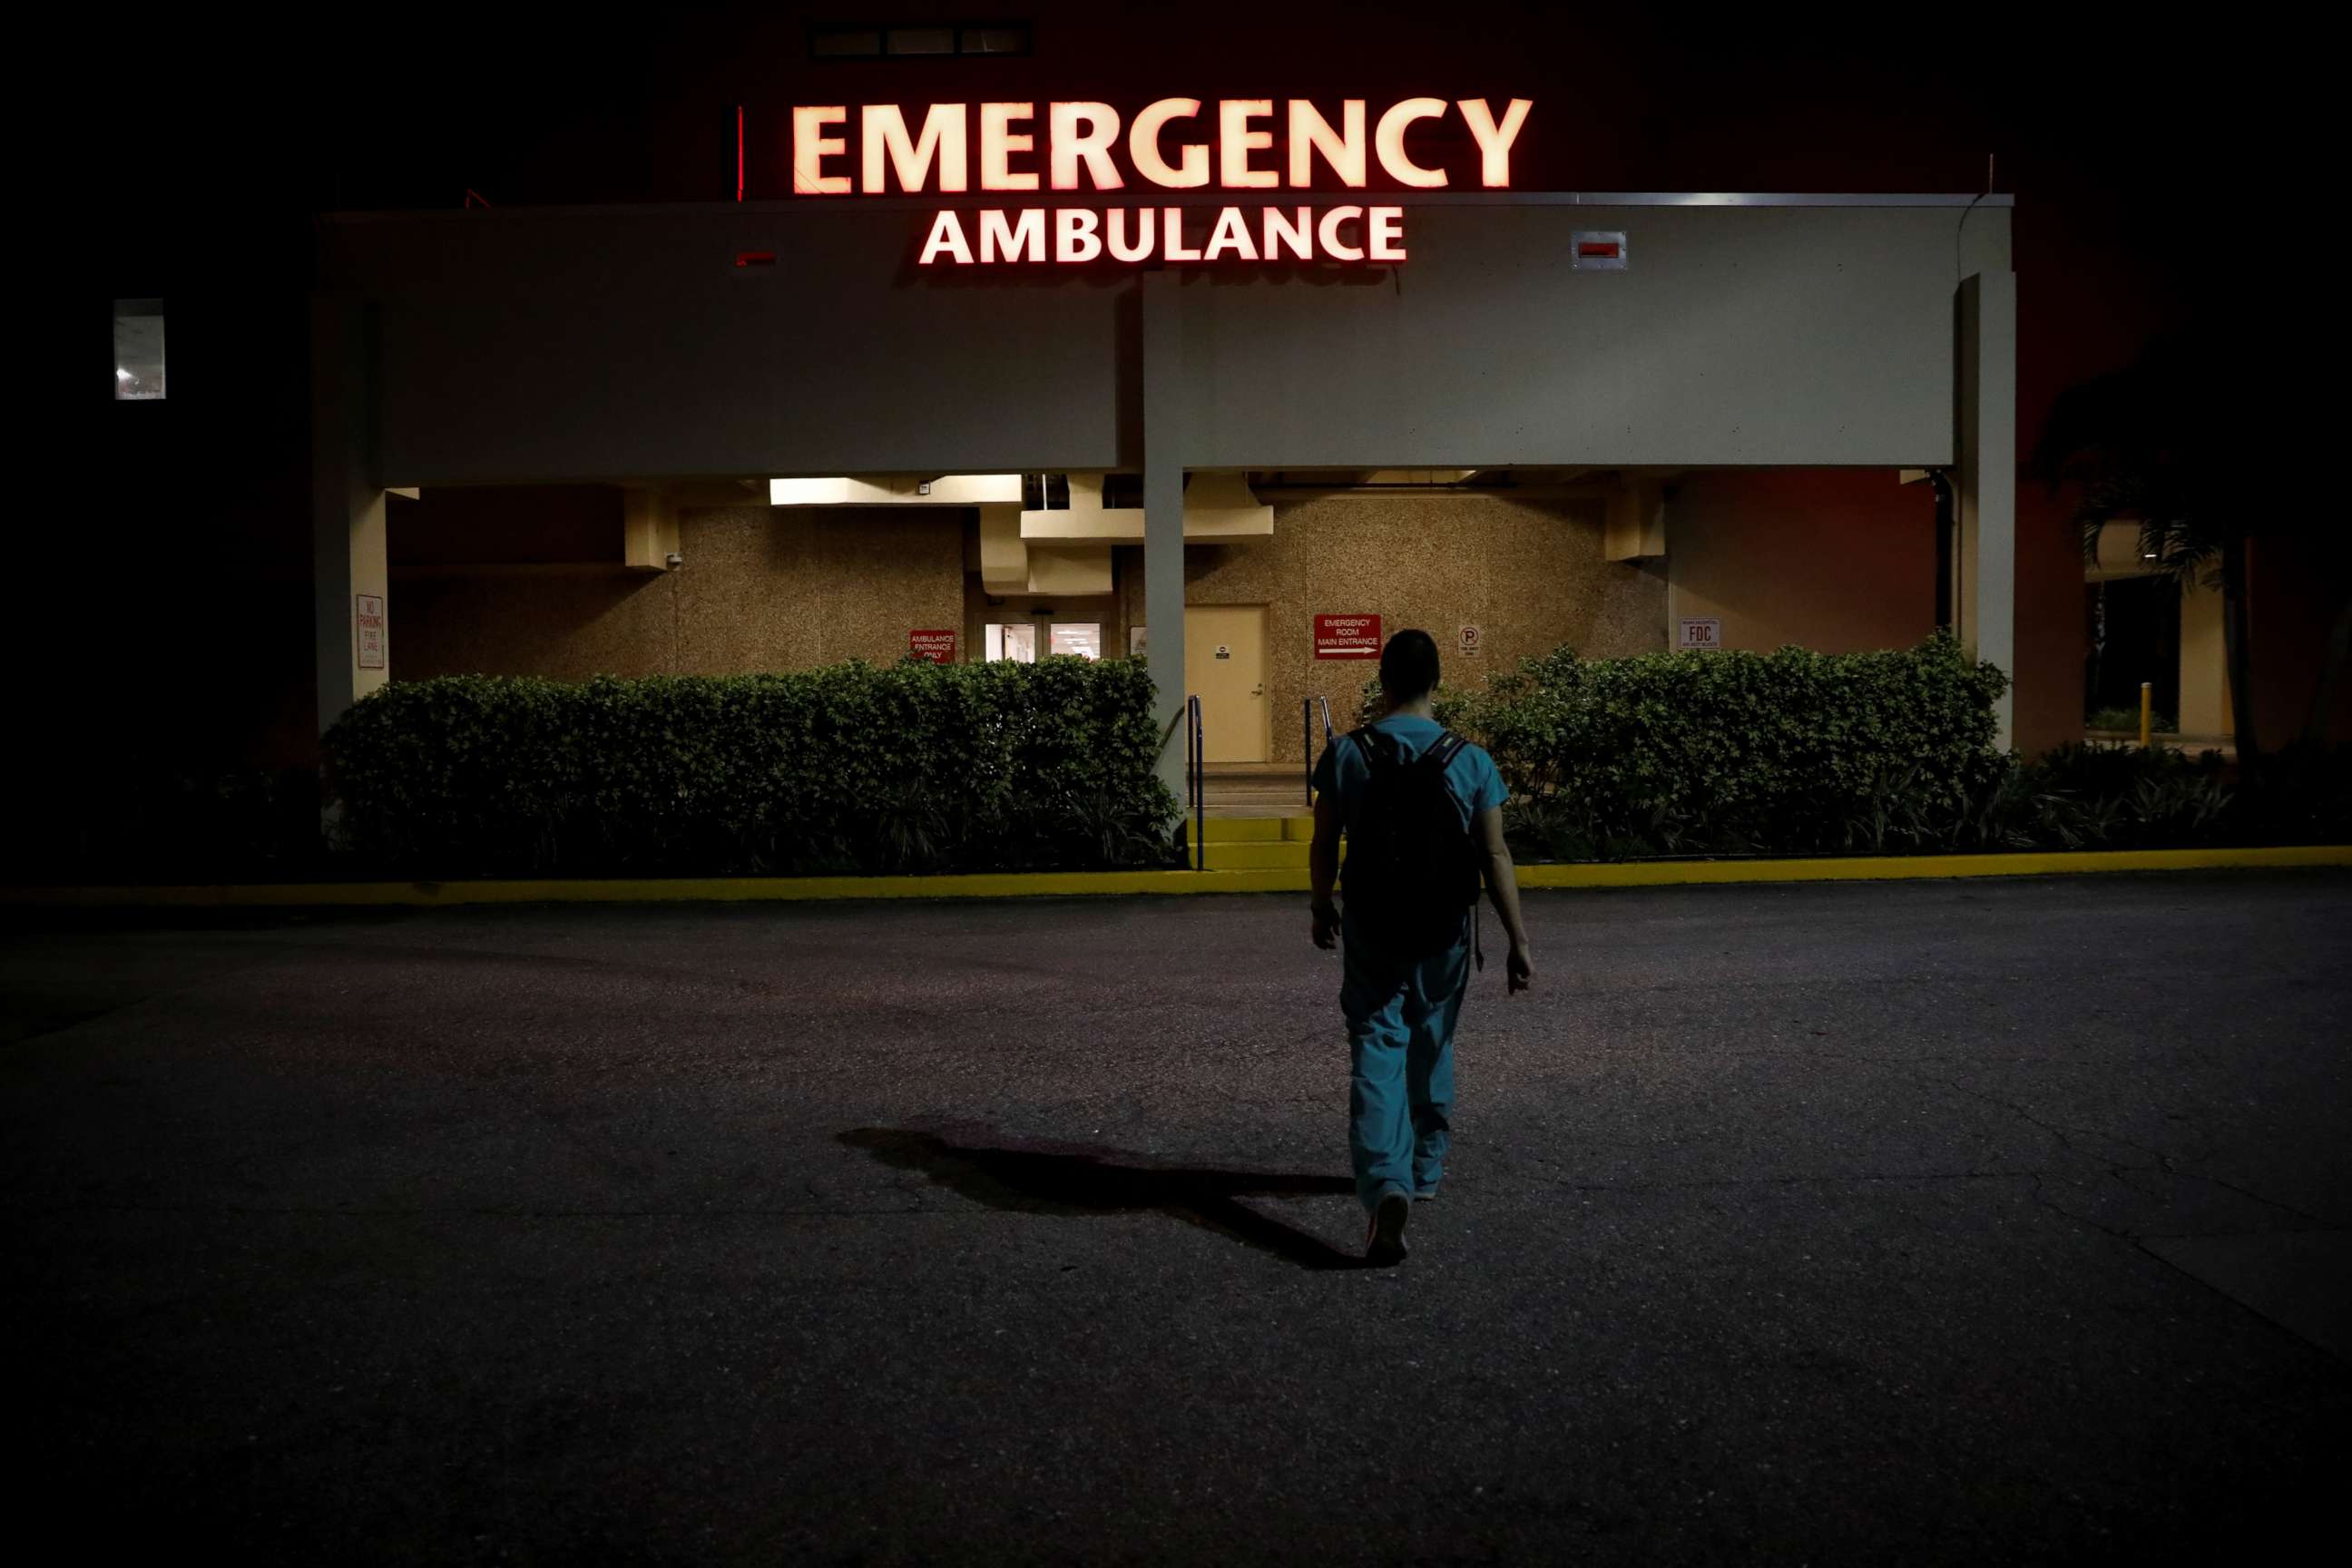 PHOTO: Dennis D'Urso, a resident ER doctor at Holy Cross Hospital, arrives at work for the start of his shift amid an outbreak of coronavirus disease (COVID-19), in Fort Lauderdale, Florida, U.S., April 20, 2020.